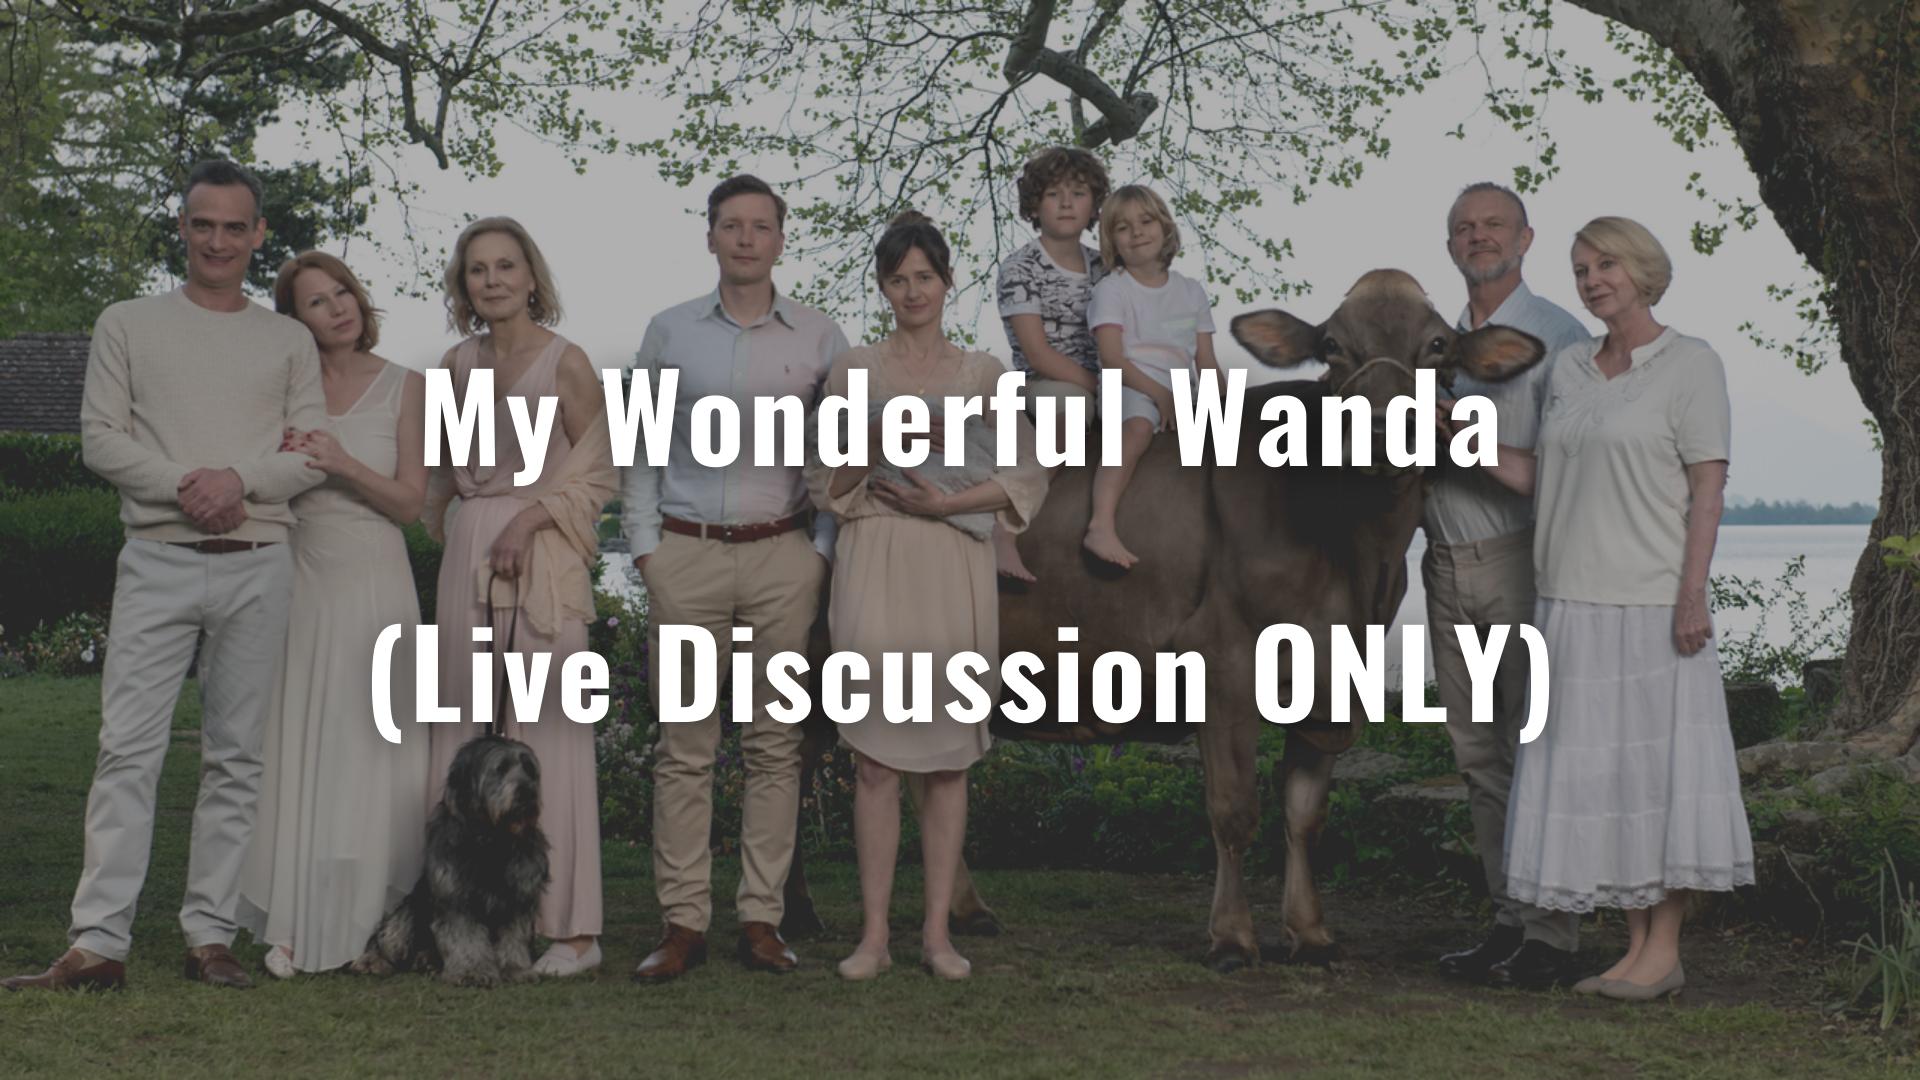 [FREE LIVE DISCUSSION ONLY] My Wonderful Wanda Live Discussion with Director Bettina Oberli